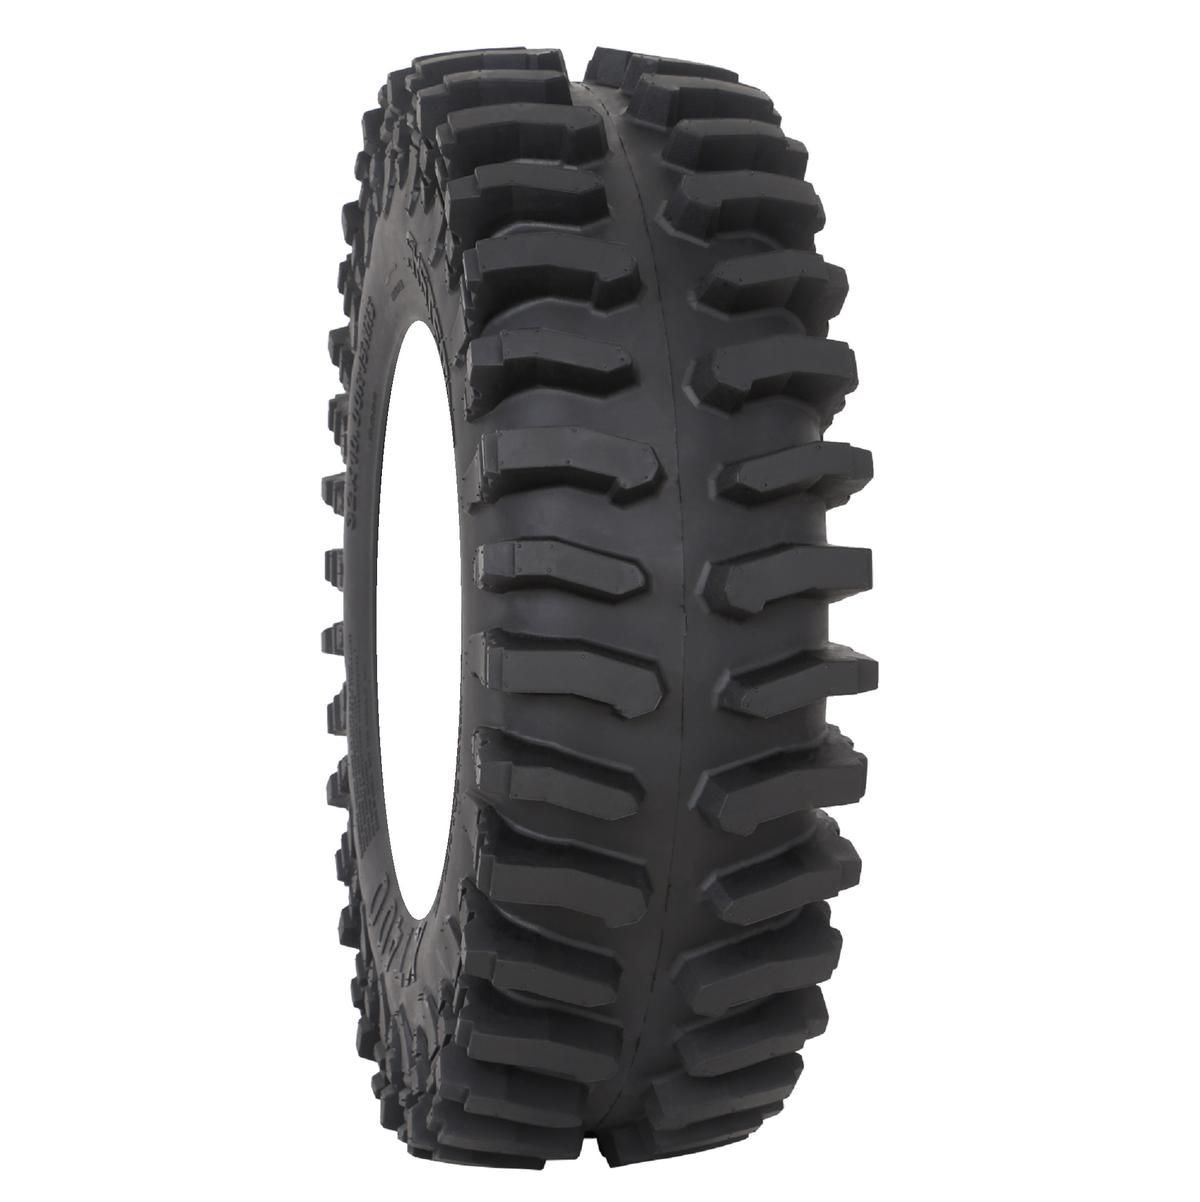 14 System 3 Offroad XTR370 Tire System 3 Off-Road 30 x 10R 